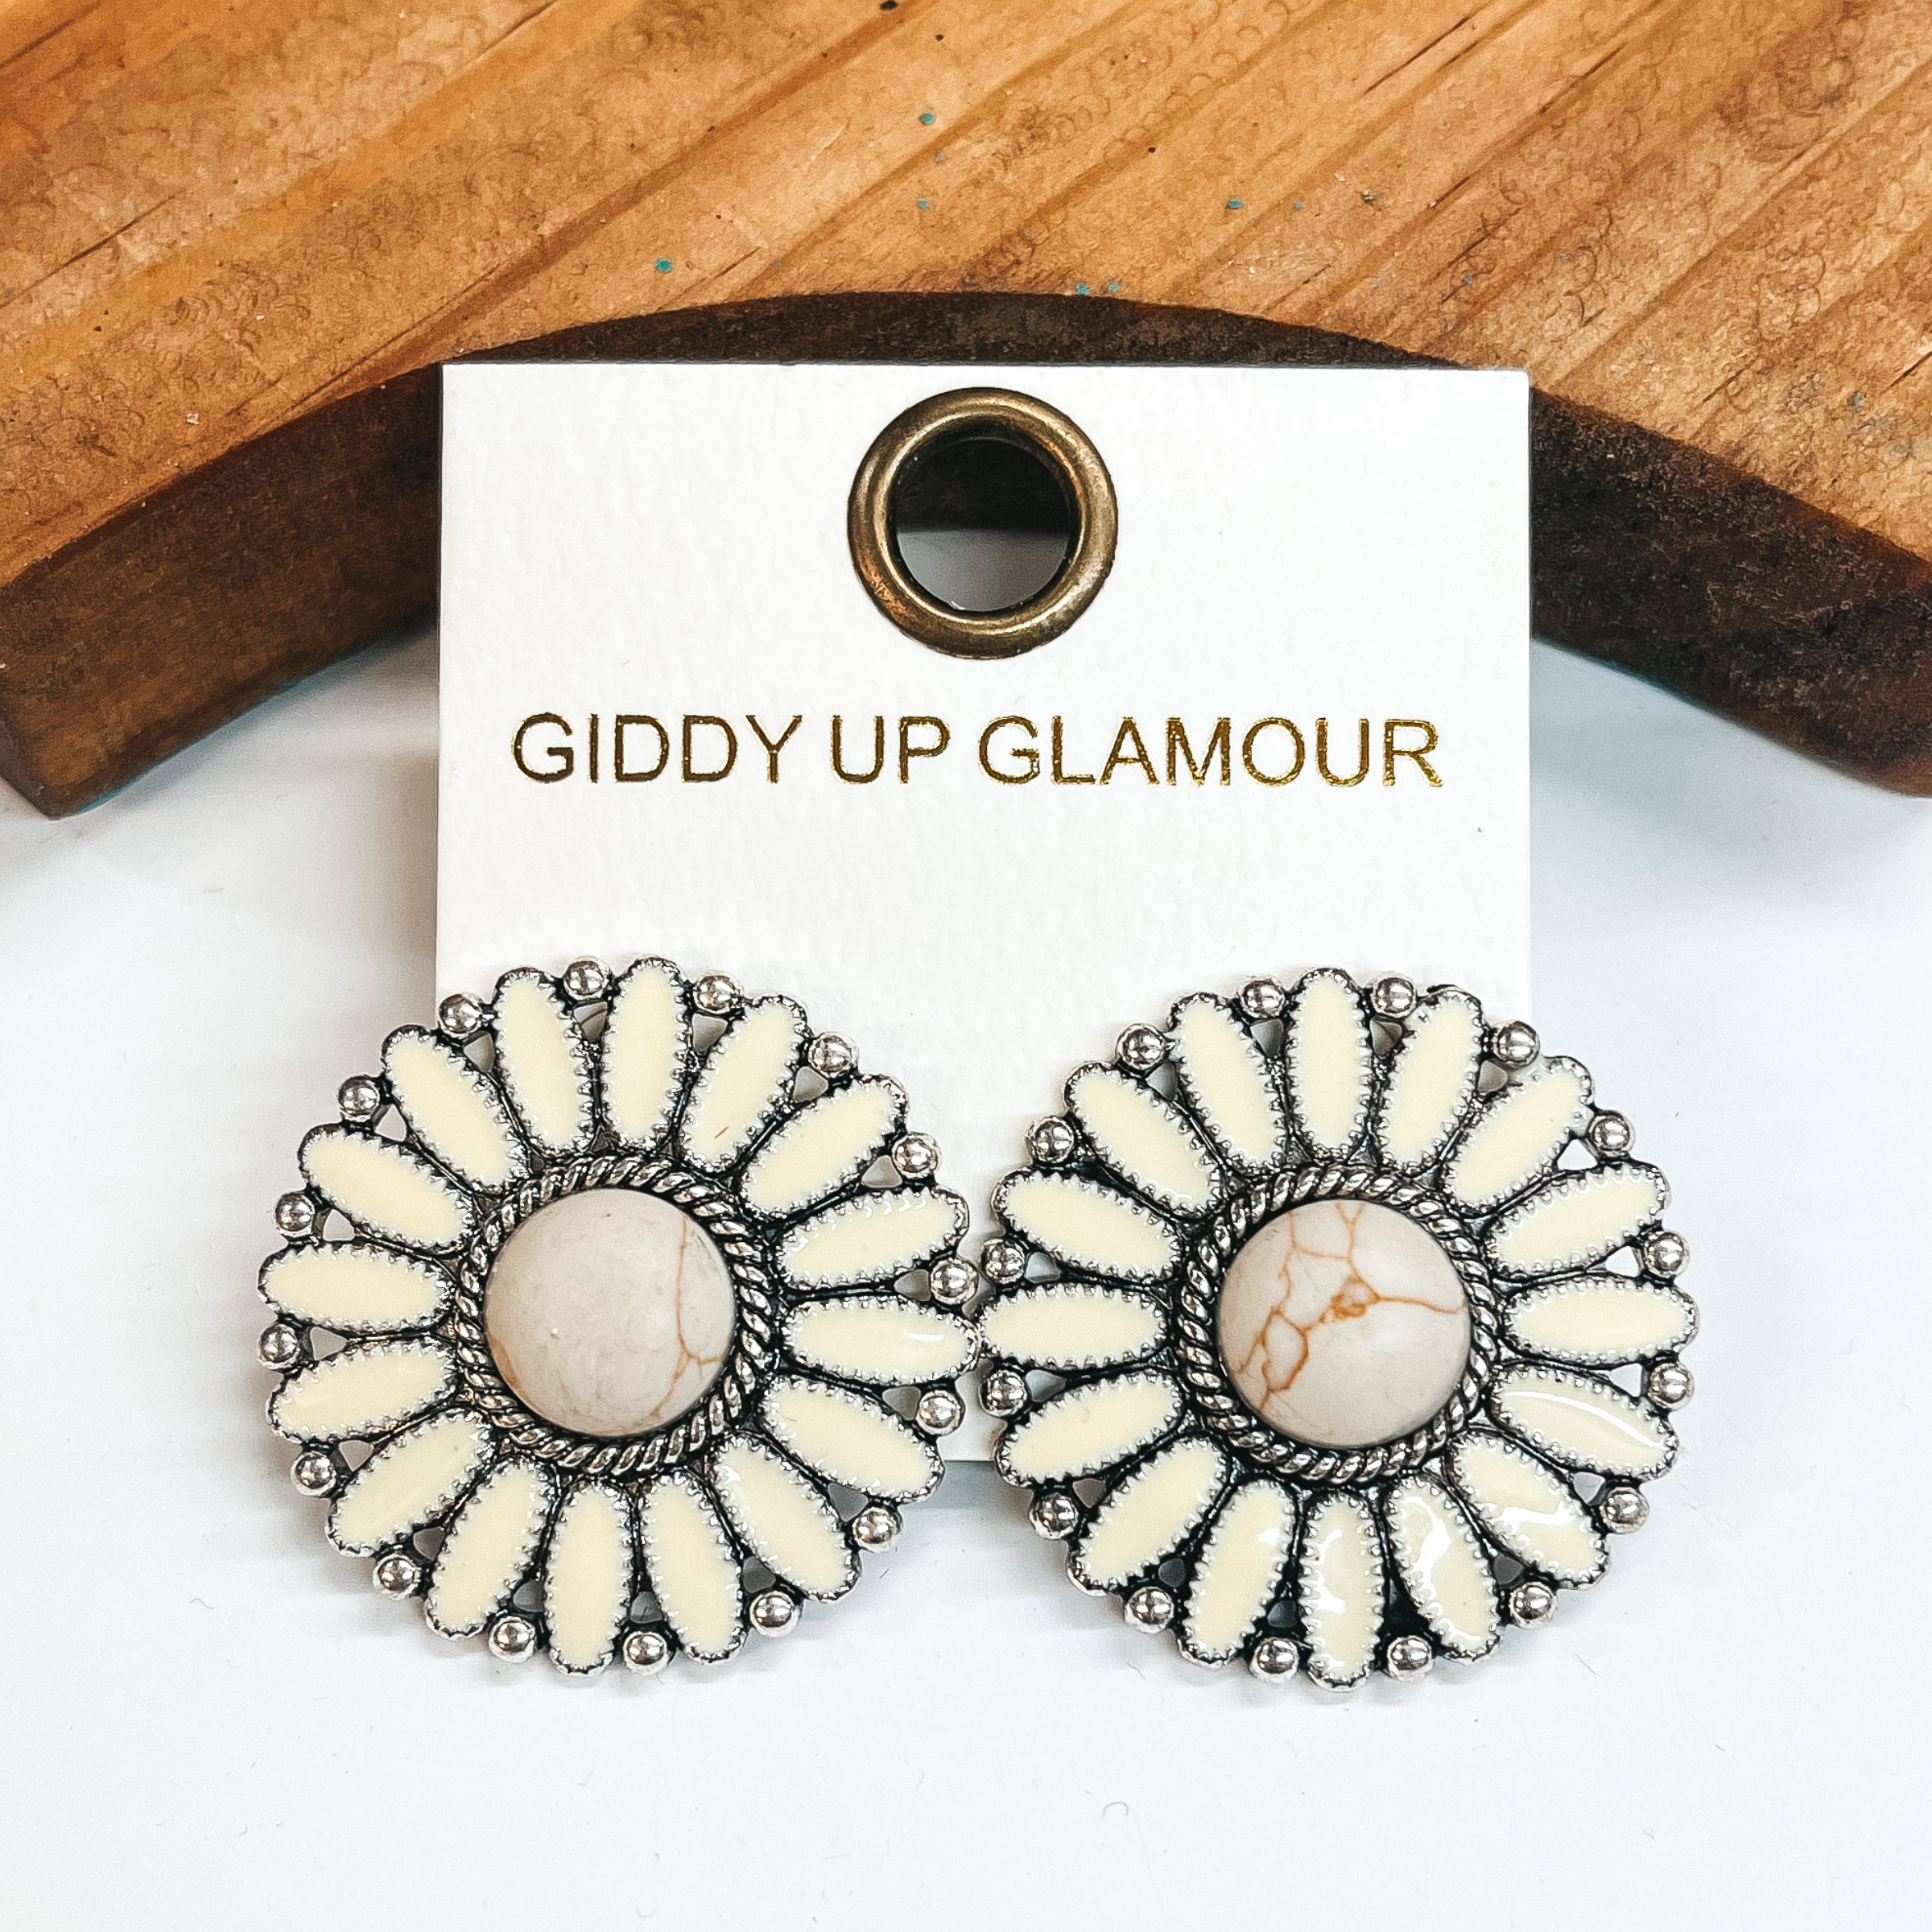 Ivory concho earrings with a center ivory stone and  silver outline. These earrings are pictured leaning  up against a brown block with a white background.